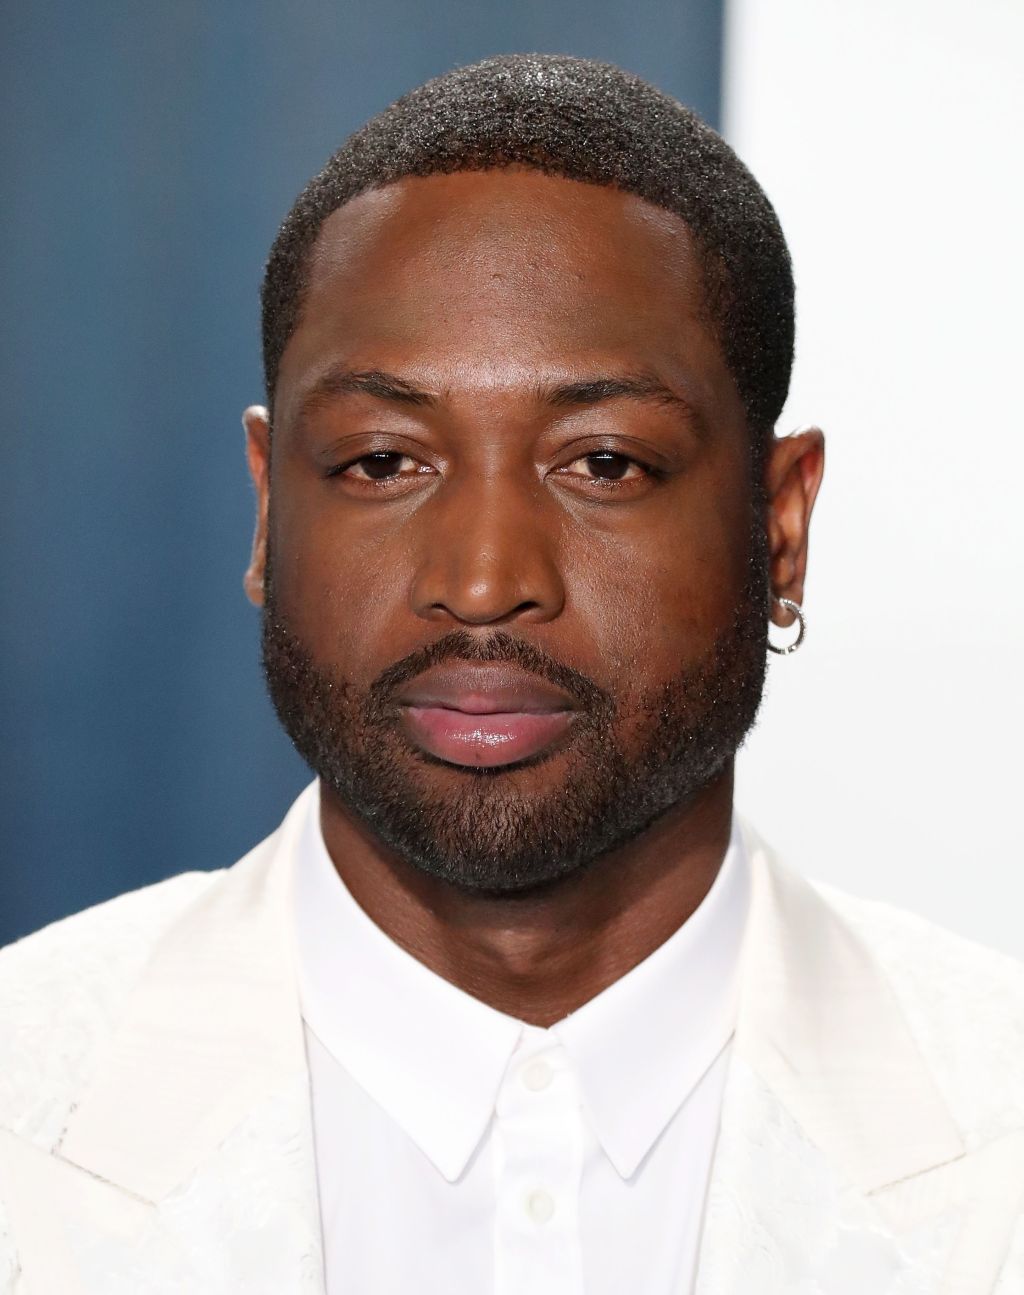 Dwyane Wade arrives at the 2020 Vanity Fair Oscar Party held at the Wallis Annenberg Center for the...